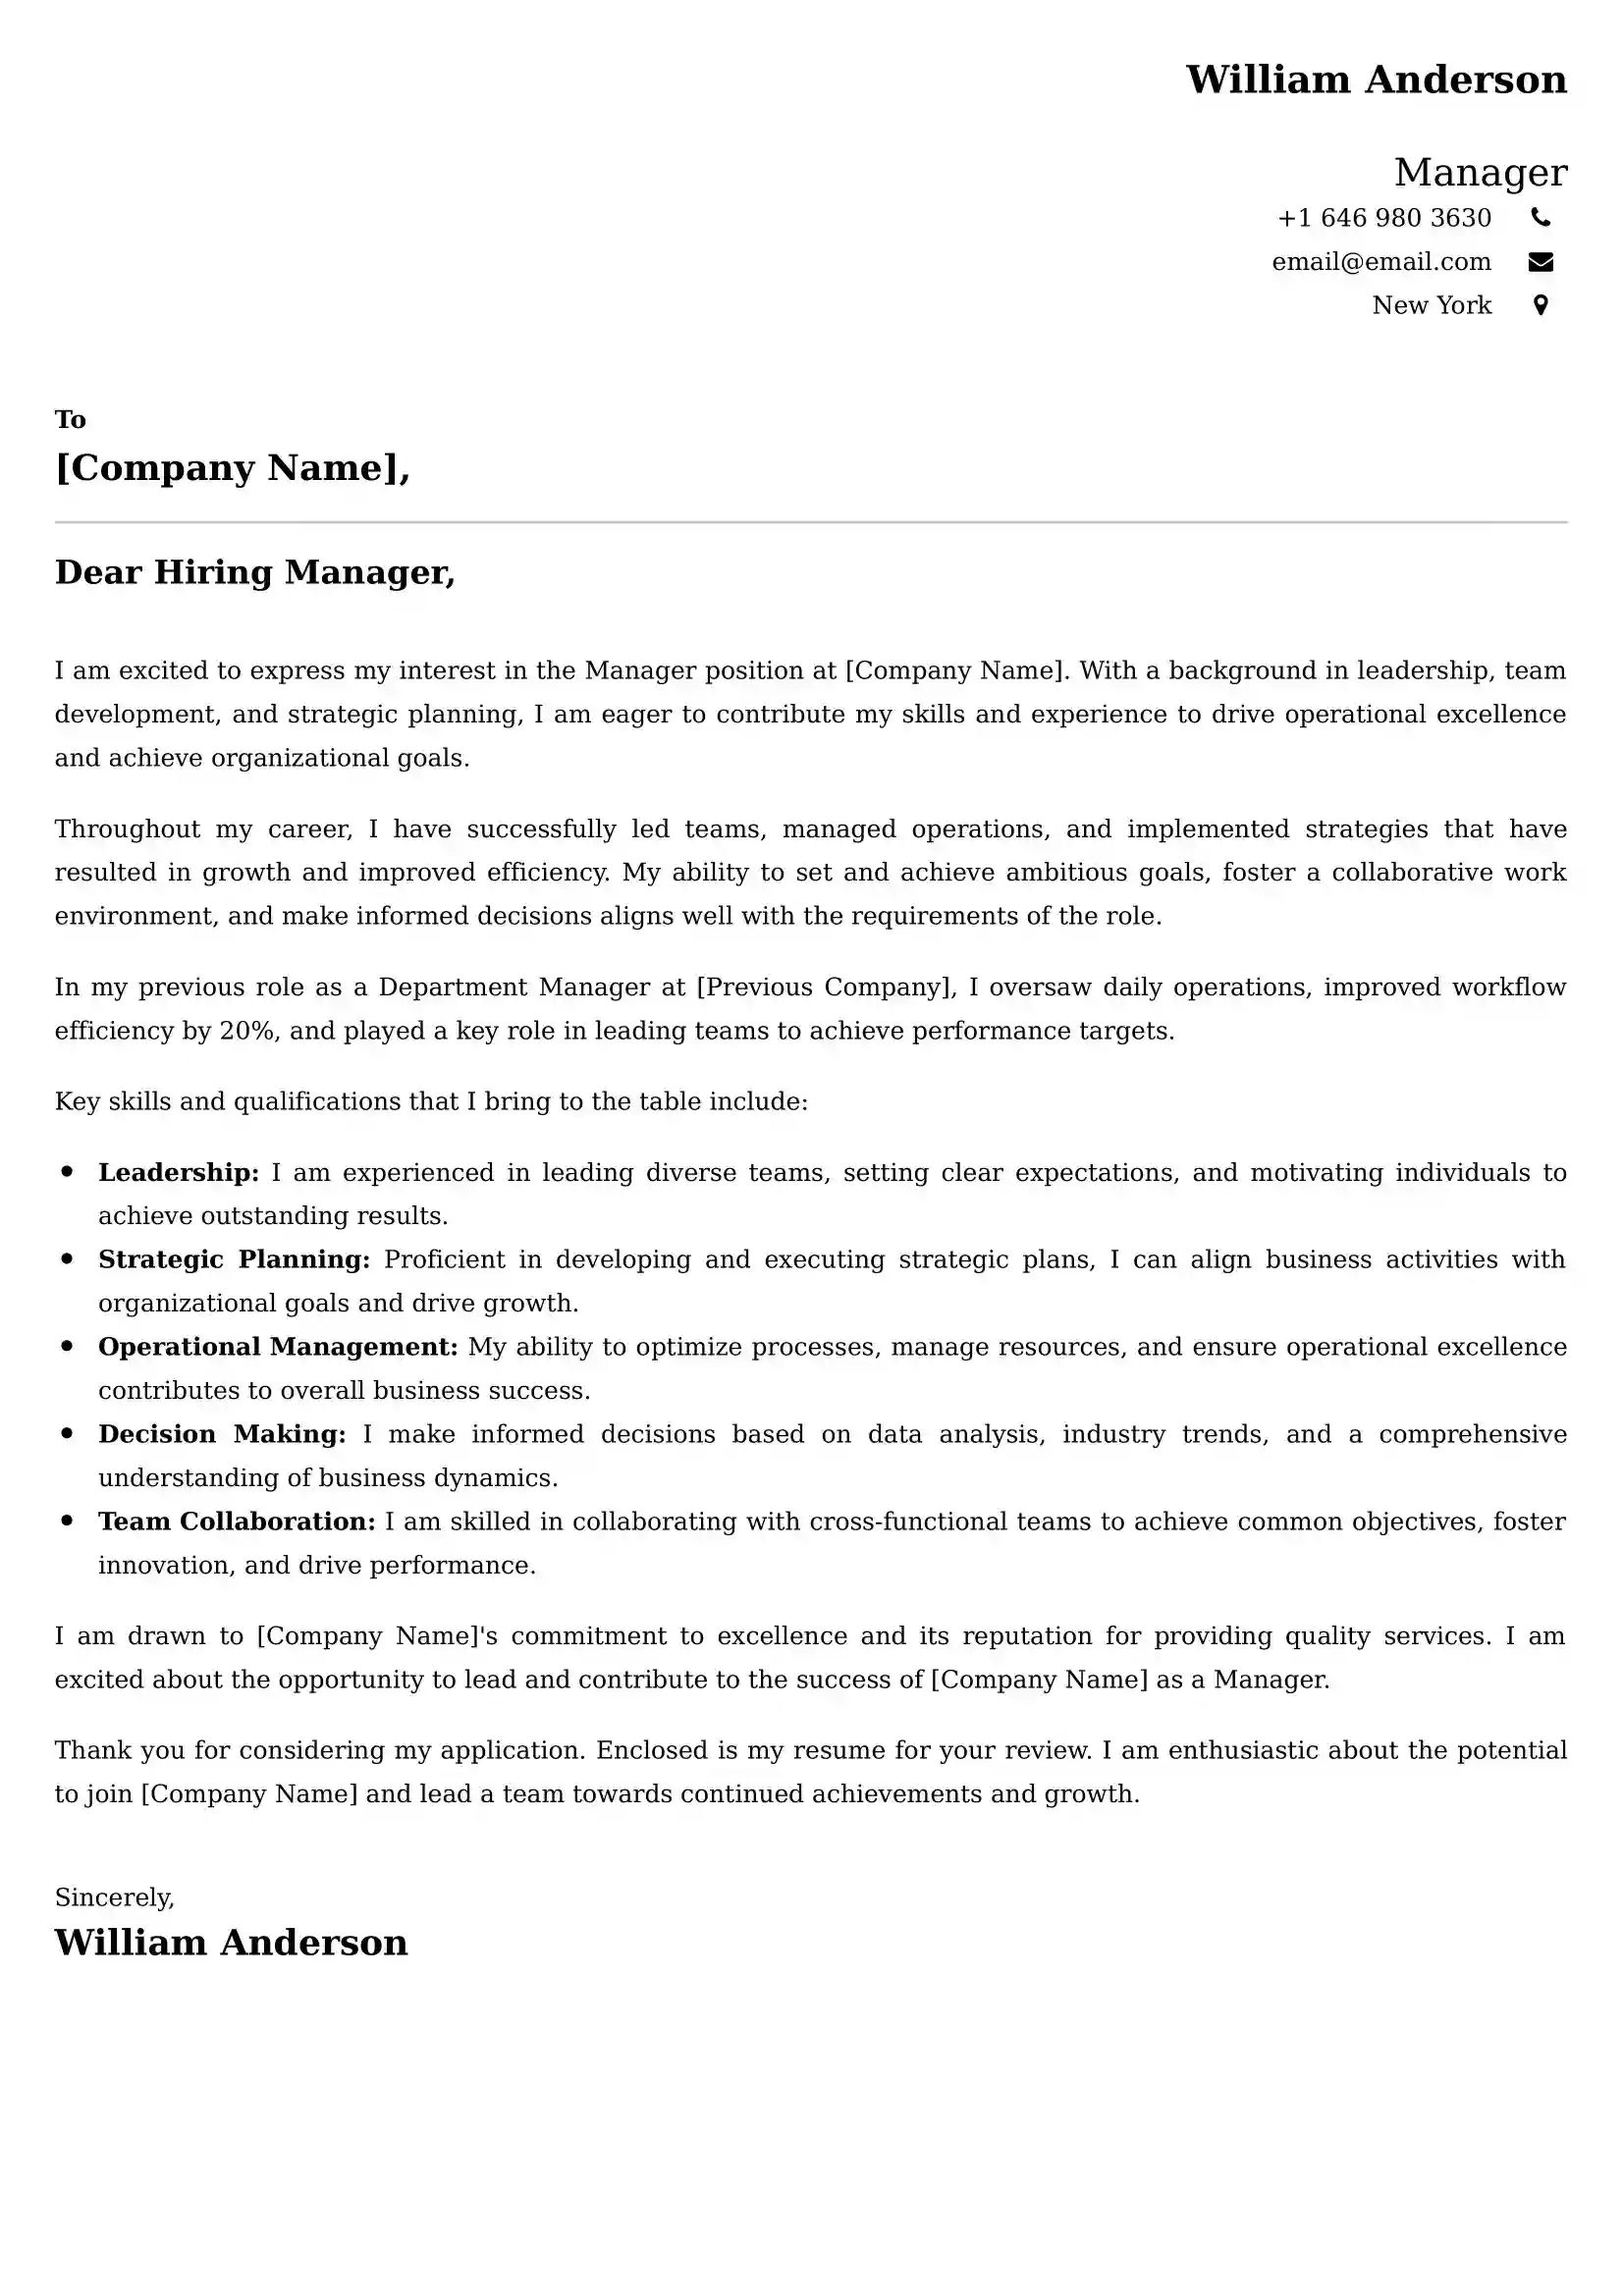 Manager Cover Letter Examples for UK 